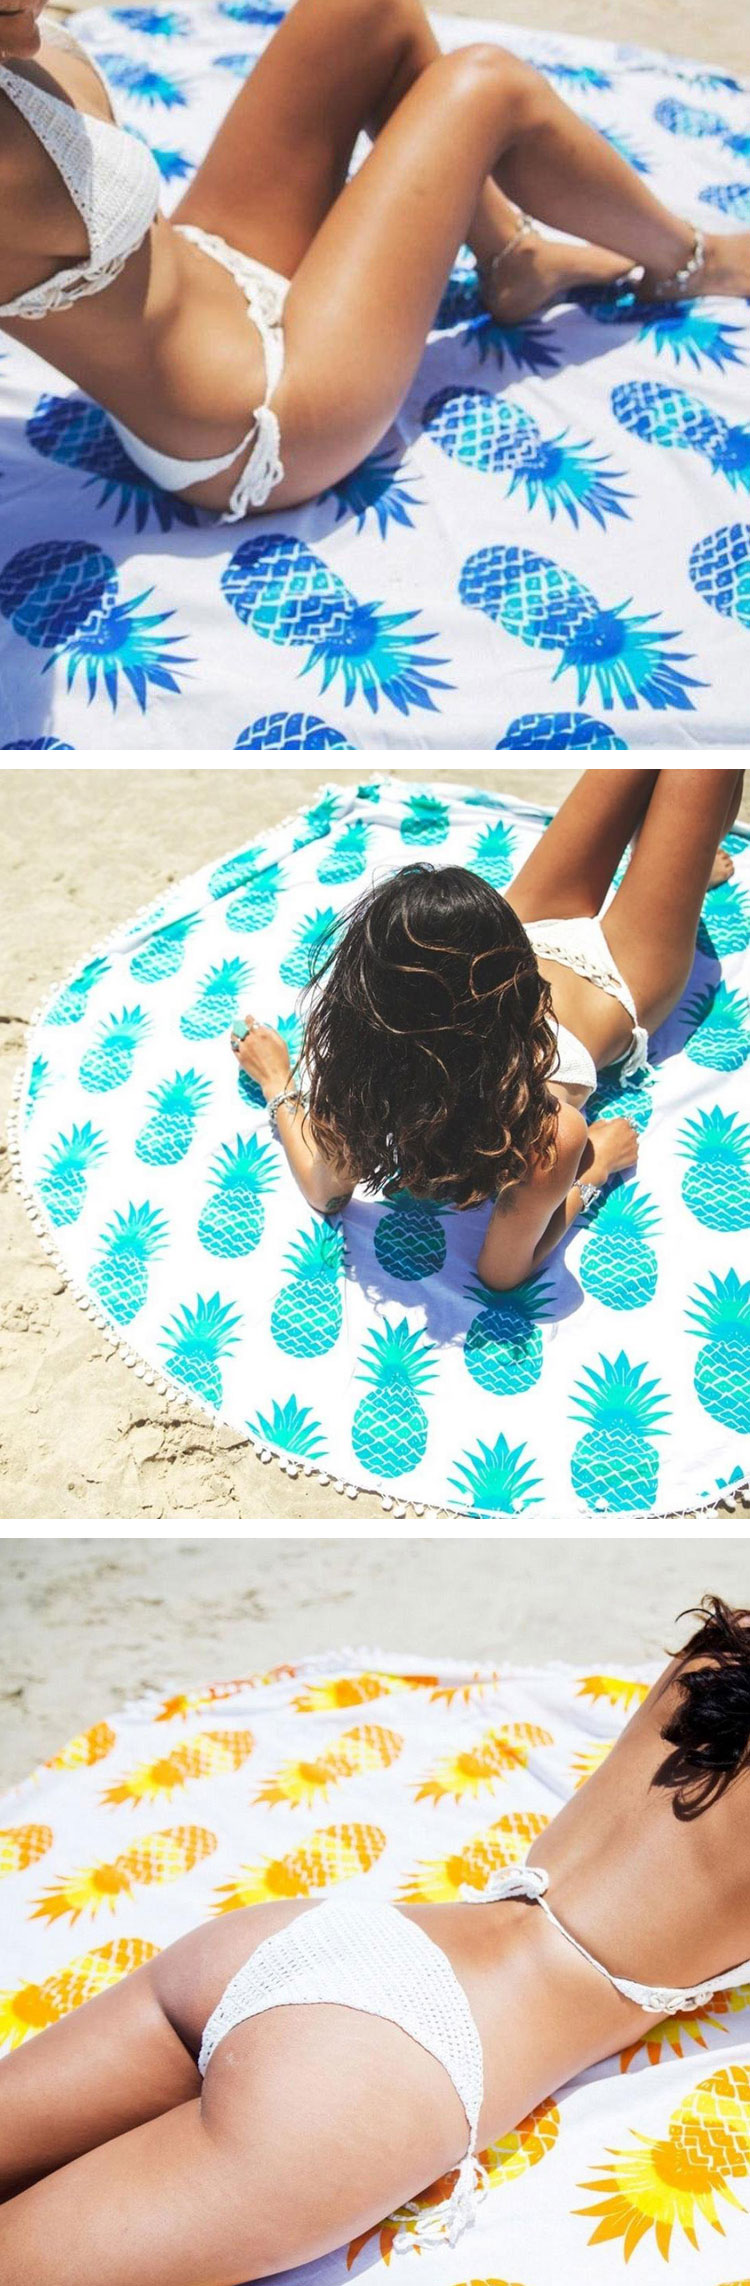 150cm-Donut-Pizza-Pineaaple-Printing-Thin-Dacron-Beach-Towel-Shawl-Bed-Sheet-Tapestry-1067092-3